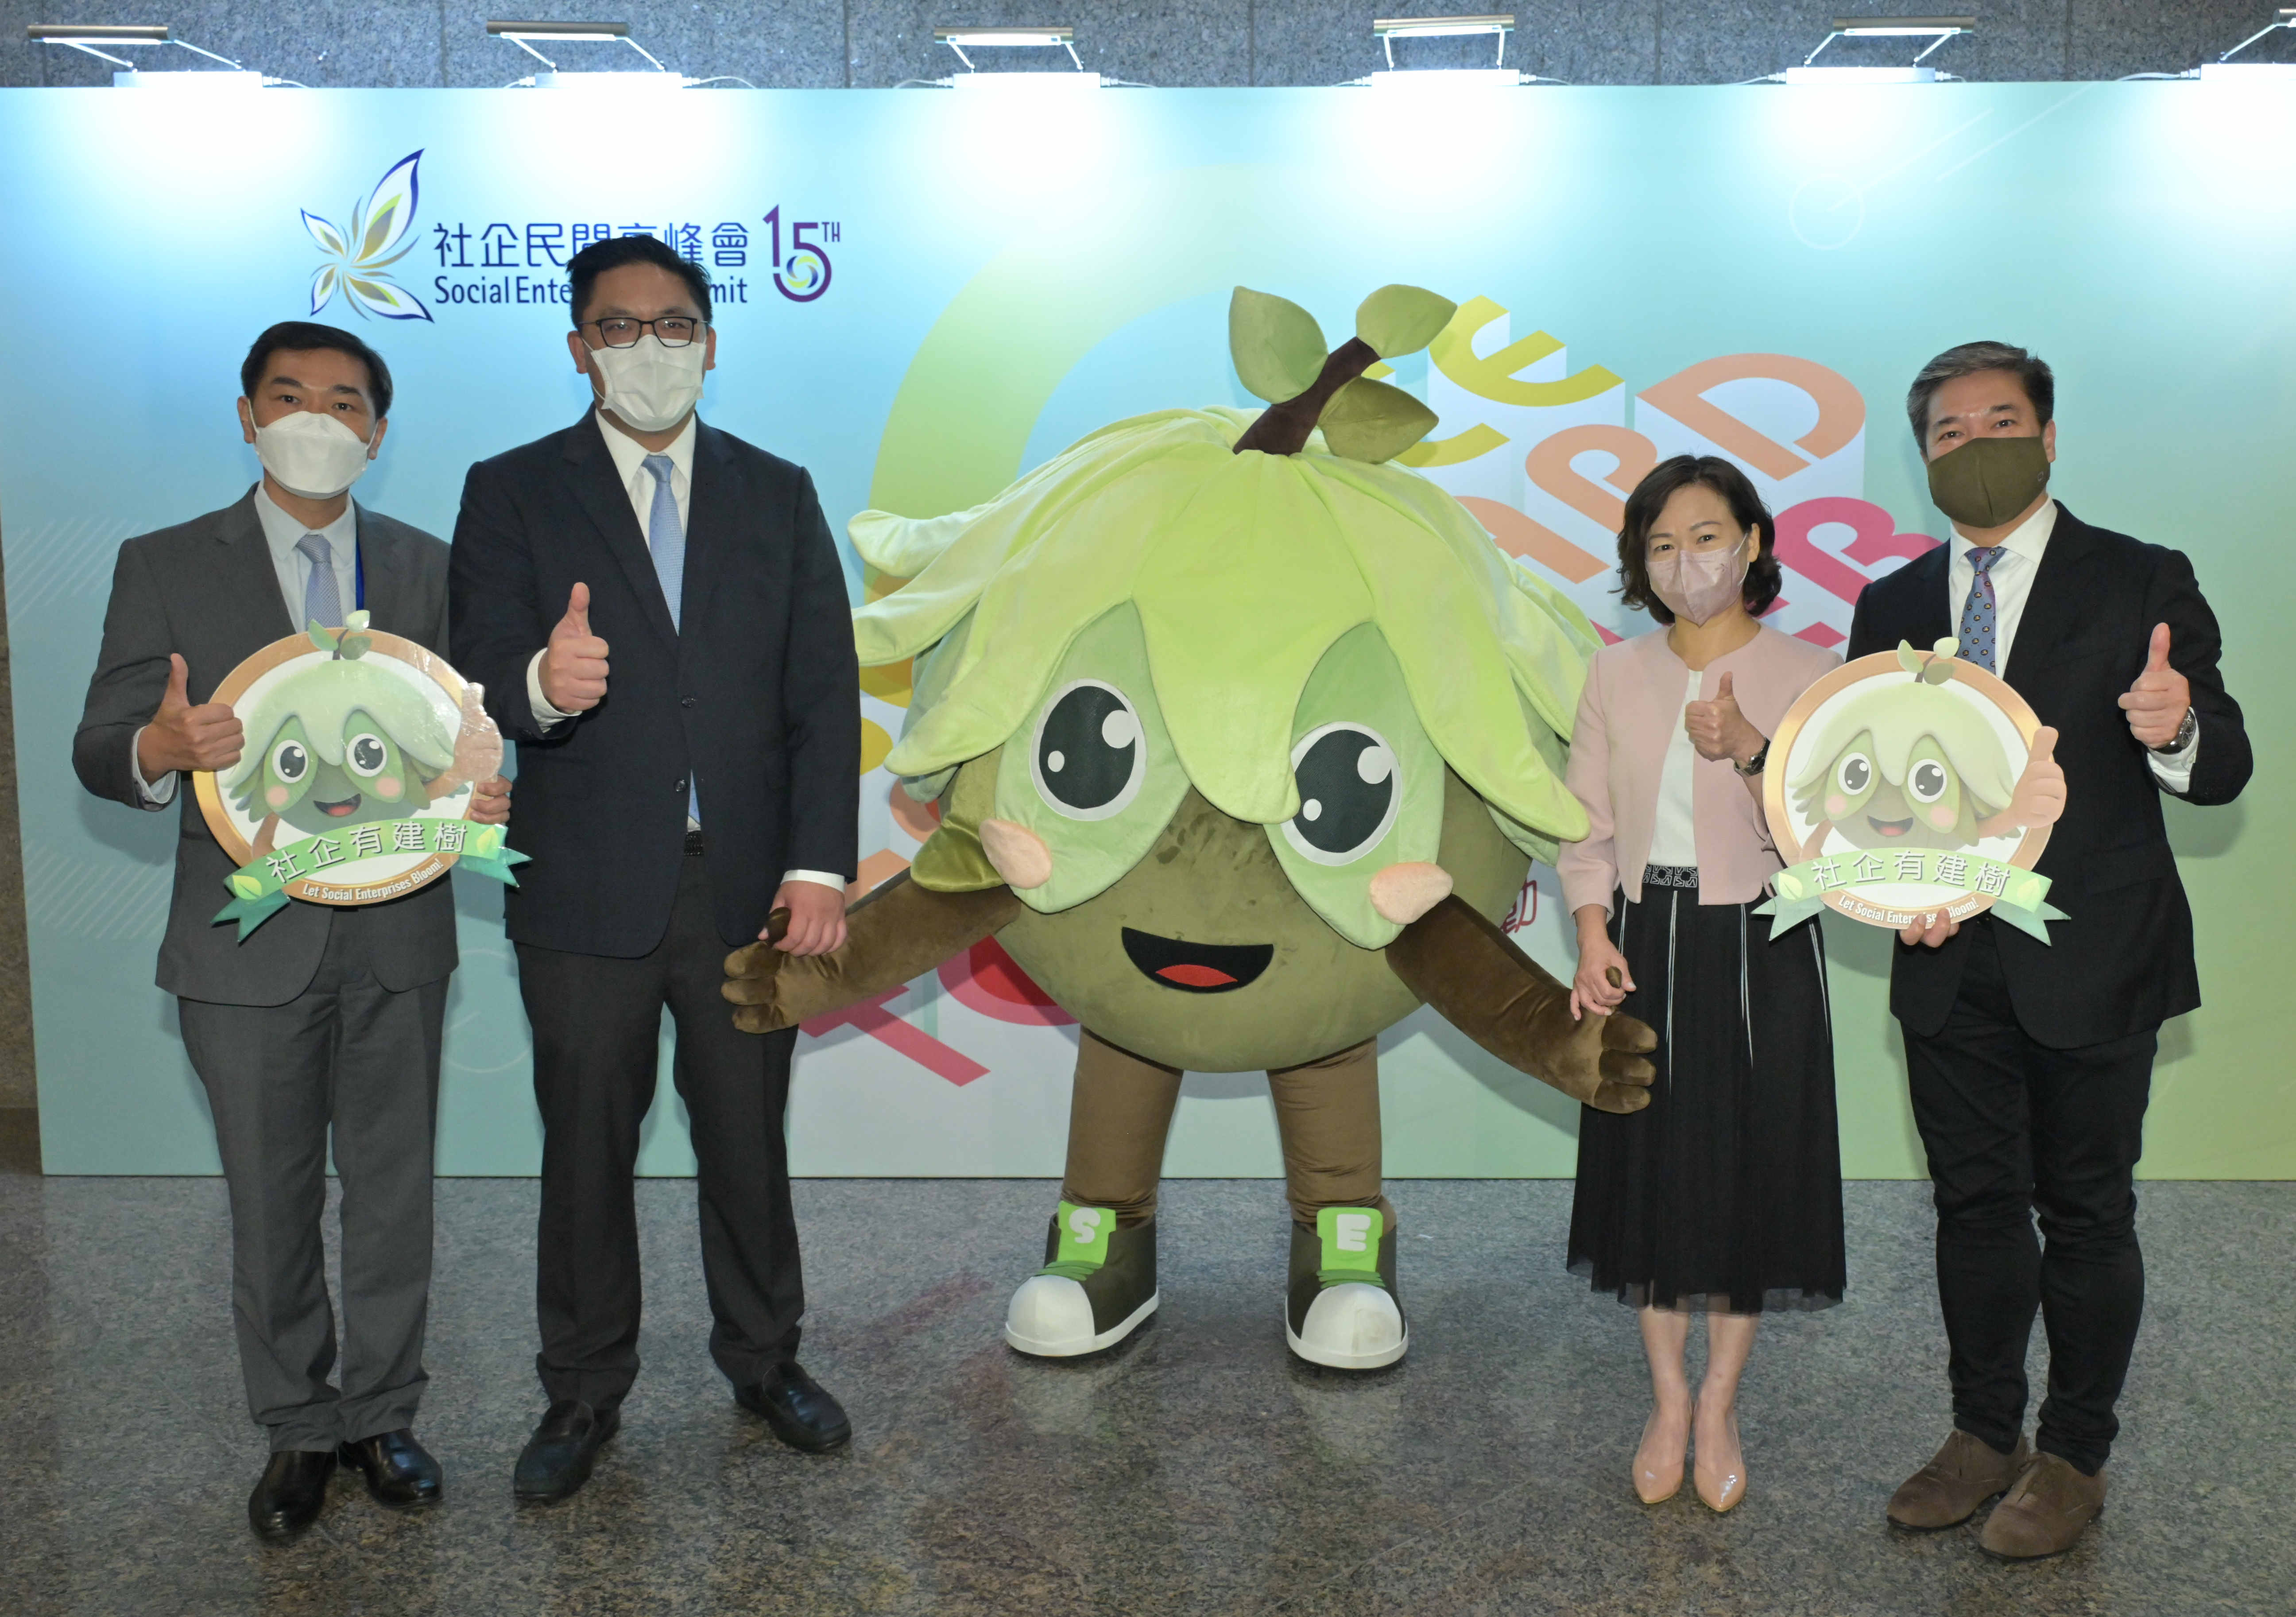 (From left) the Chairman of the Advisory Committee on the Enhancing Self-Reliance through District Partnership Programme, Mr Ricky Wong; the Under Secretary for Home and Youth Affairs, Mr Clarence Leung; Bloomy the Tree; the Director of Home Affairs, Mrs Alice Cheung; and the Chairperson of the Hong Kong Social Entrepreneurship Forum, Mr Alan Cheung, at the opening ceremony.